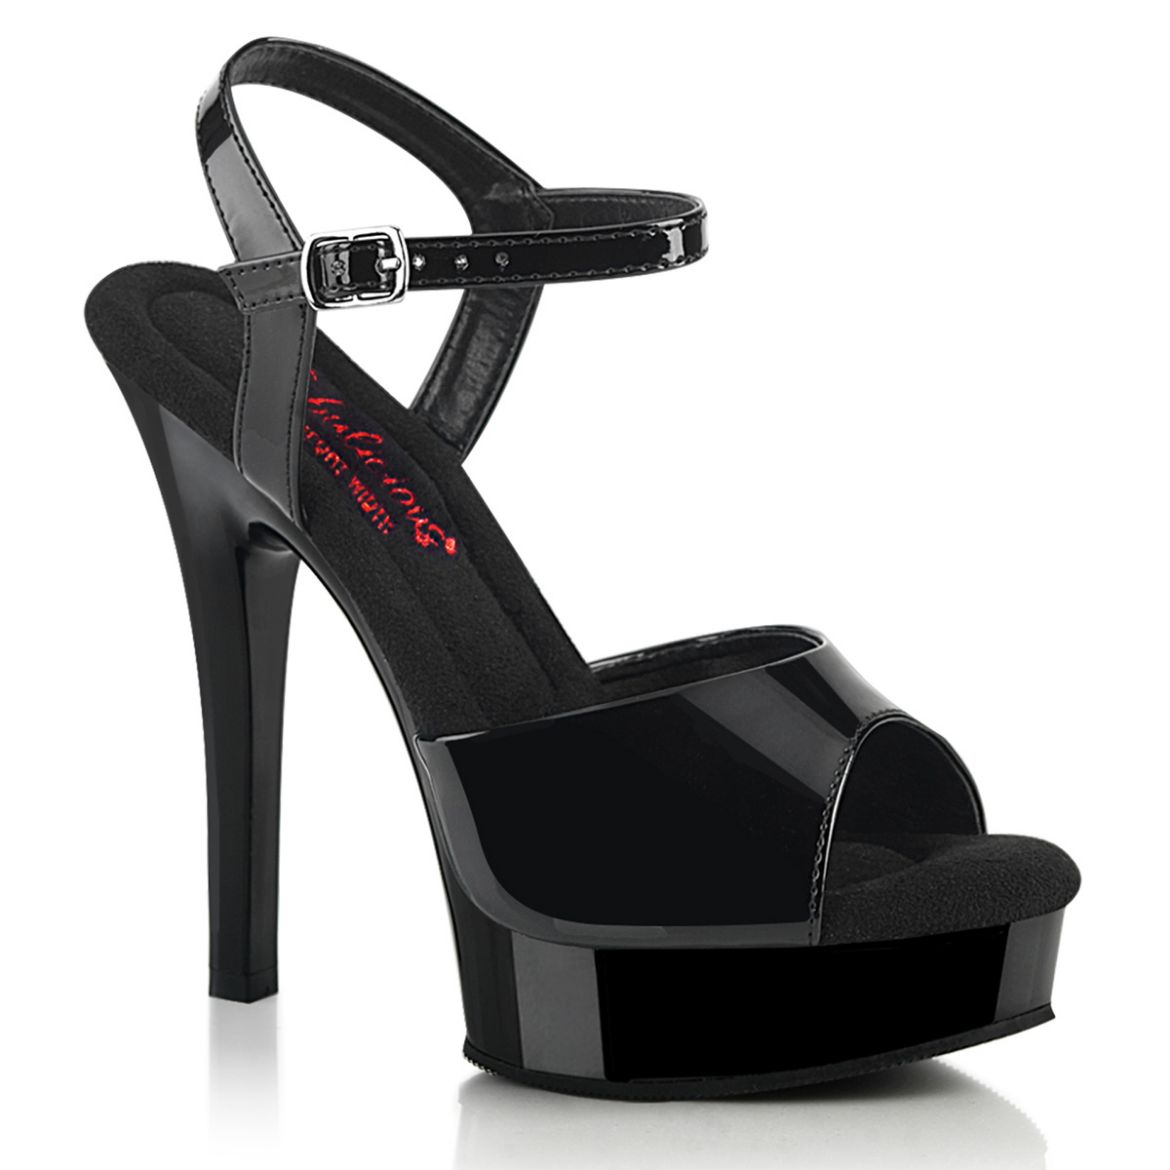 Image of Fabulicious MAJESTY-509 Blk Pat/Blk 5 Inch Heel 7/8 Inch PF Ankle Strap Sandal